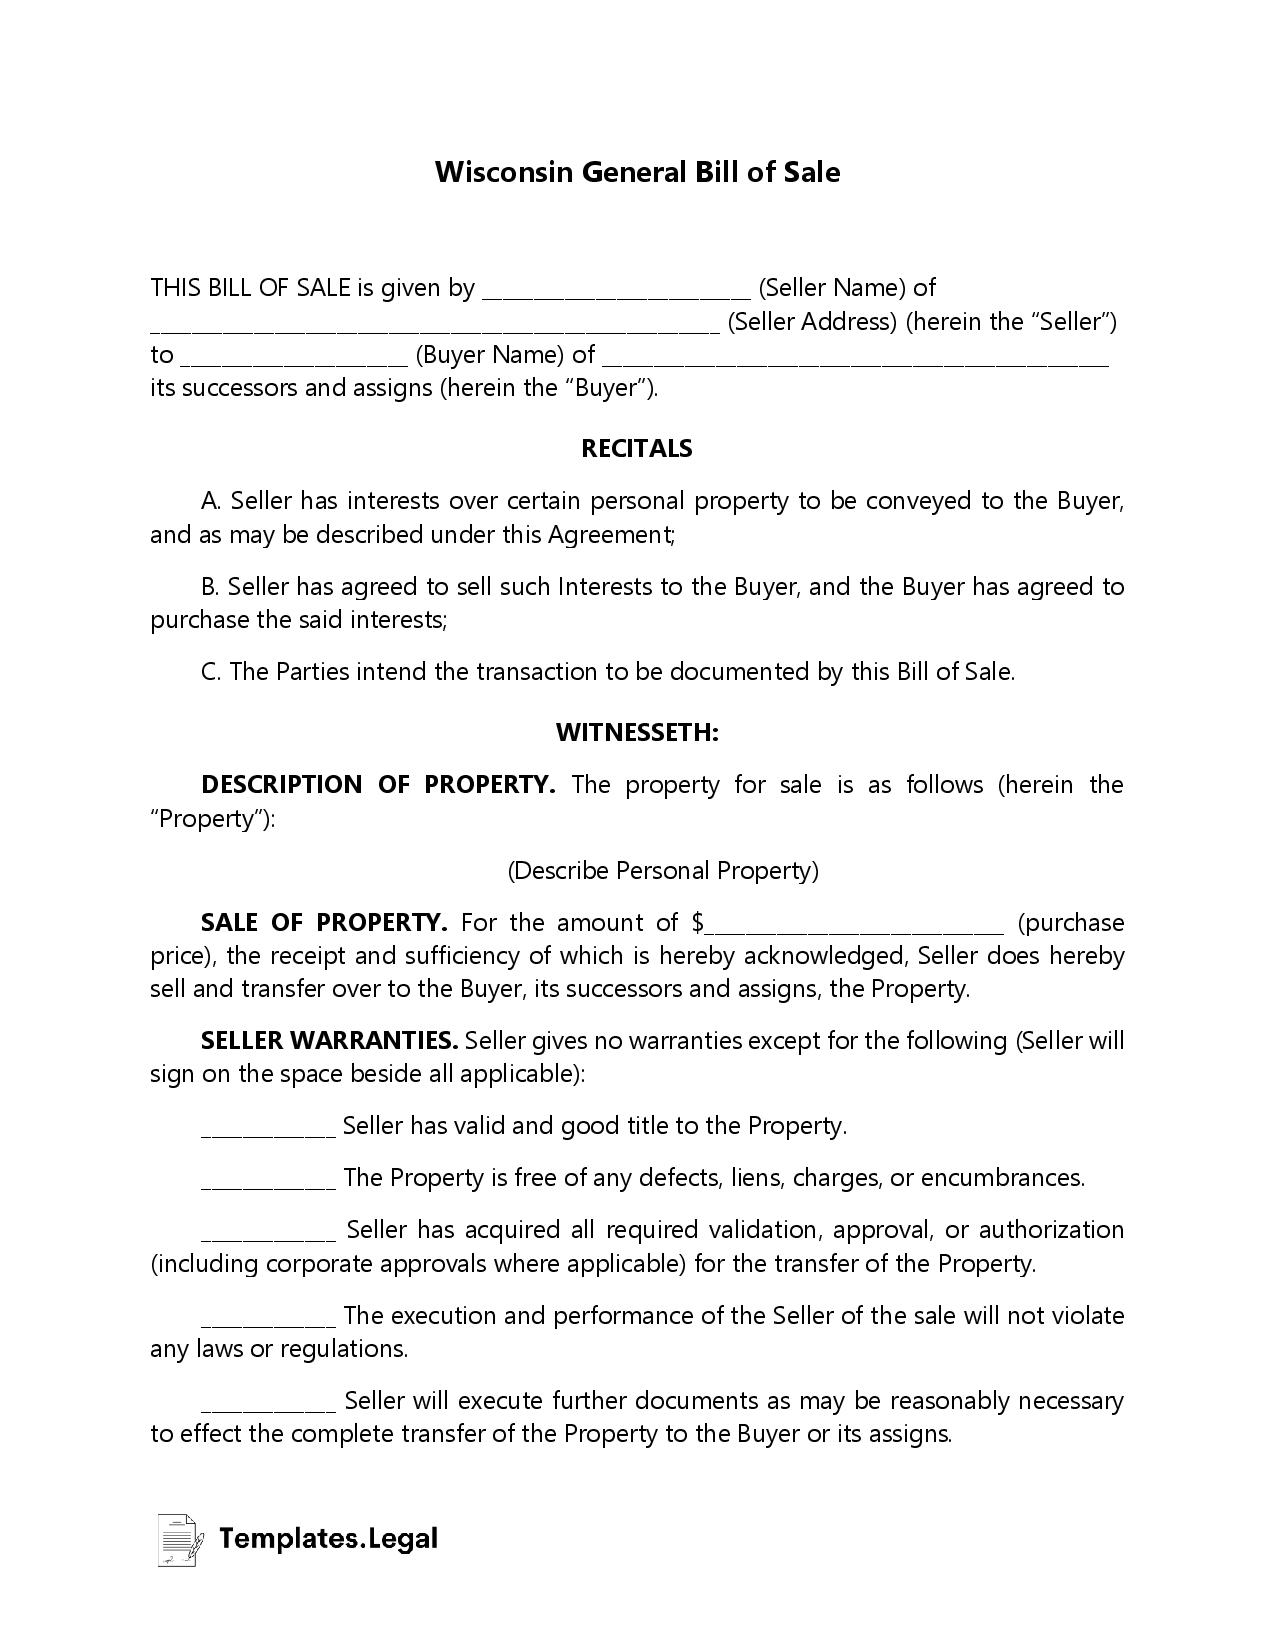 Wisconsin General Bill of Sale - Templates.Legal